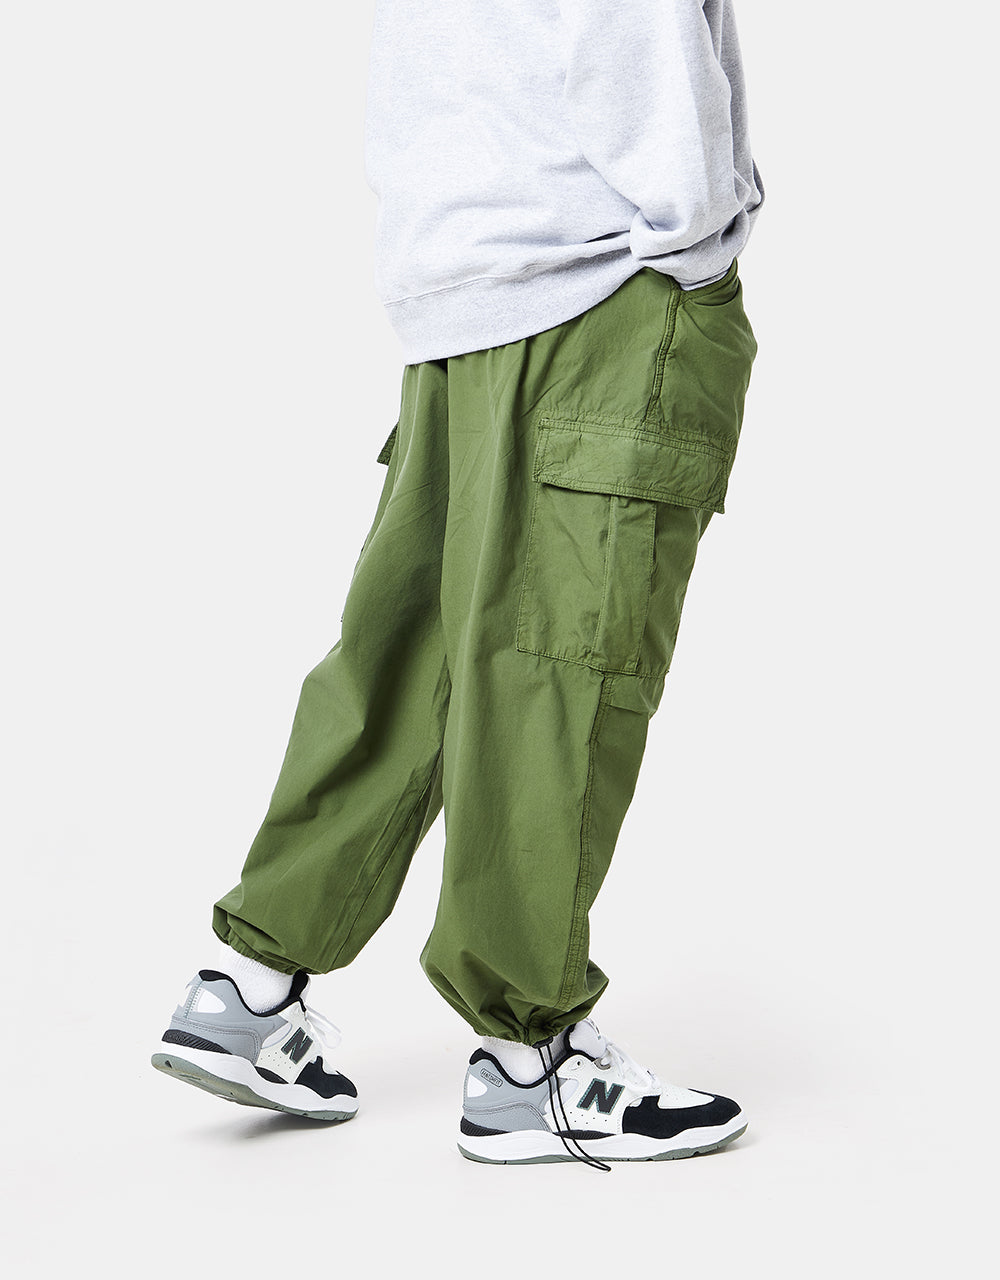 Route One Super Baggy Cargo Pant - Cypress